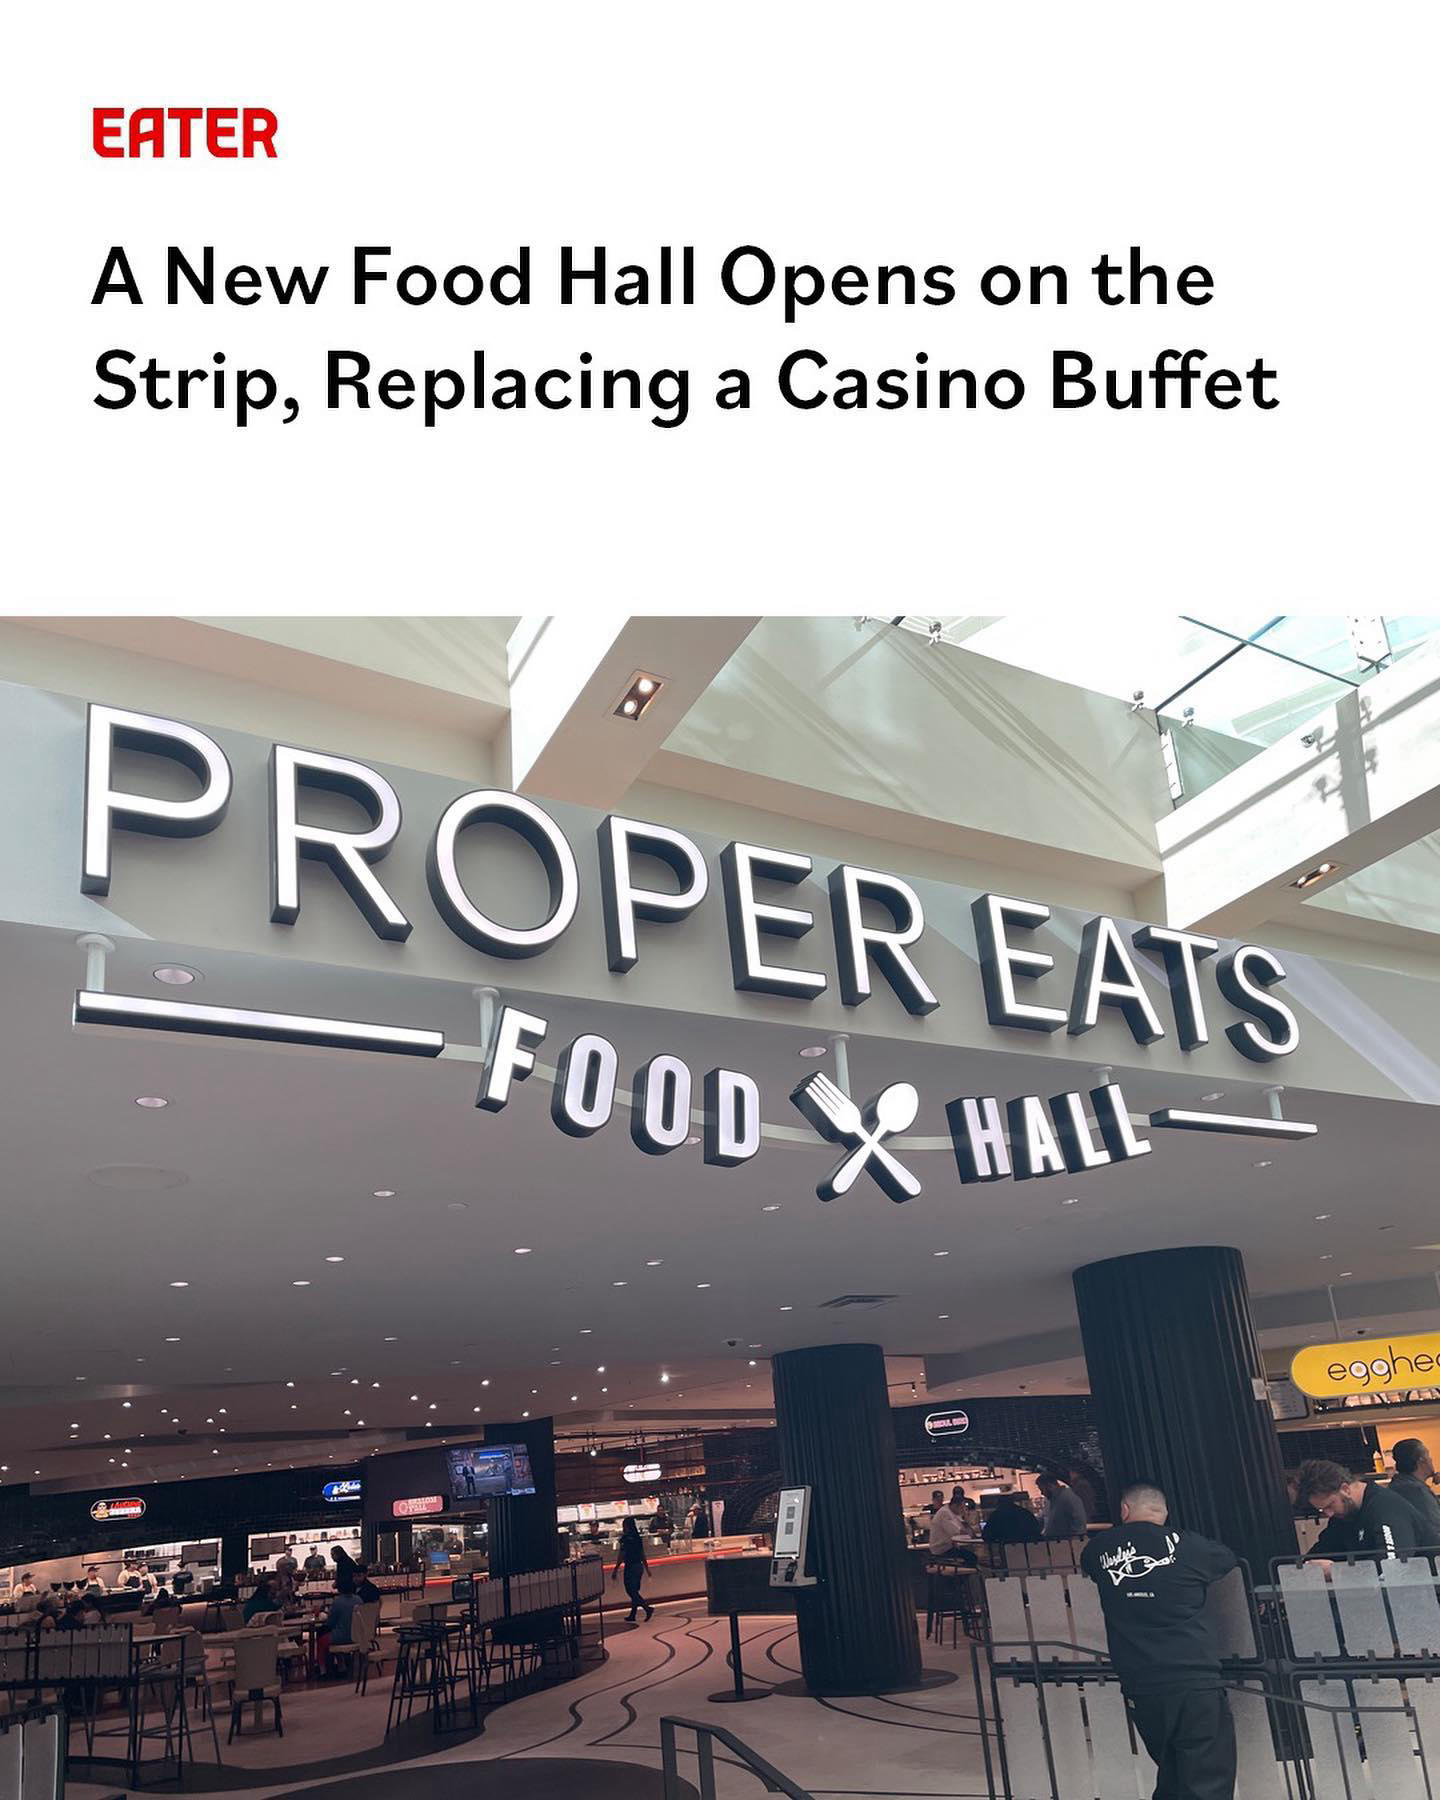 Eater Las Vegas The Proper Eats Food Hall is now open in the space